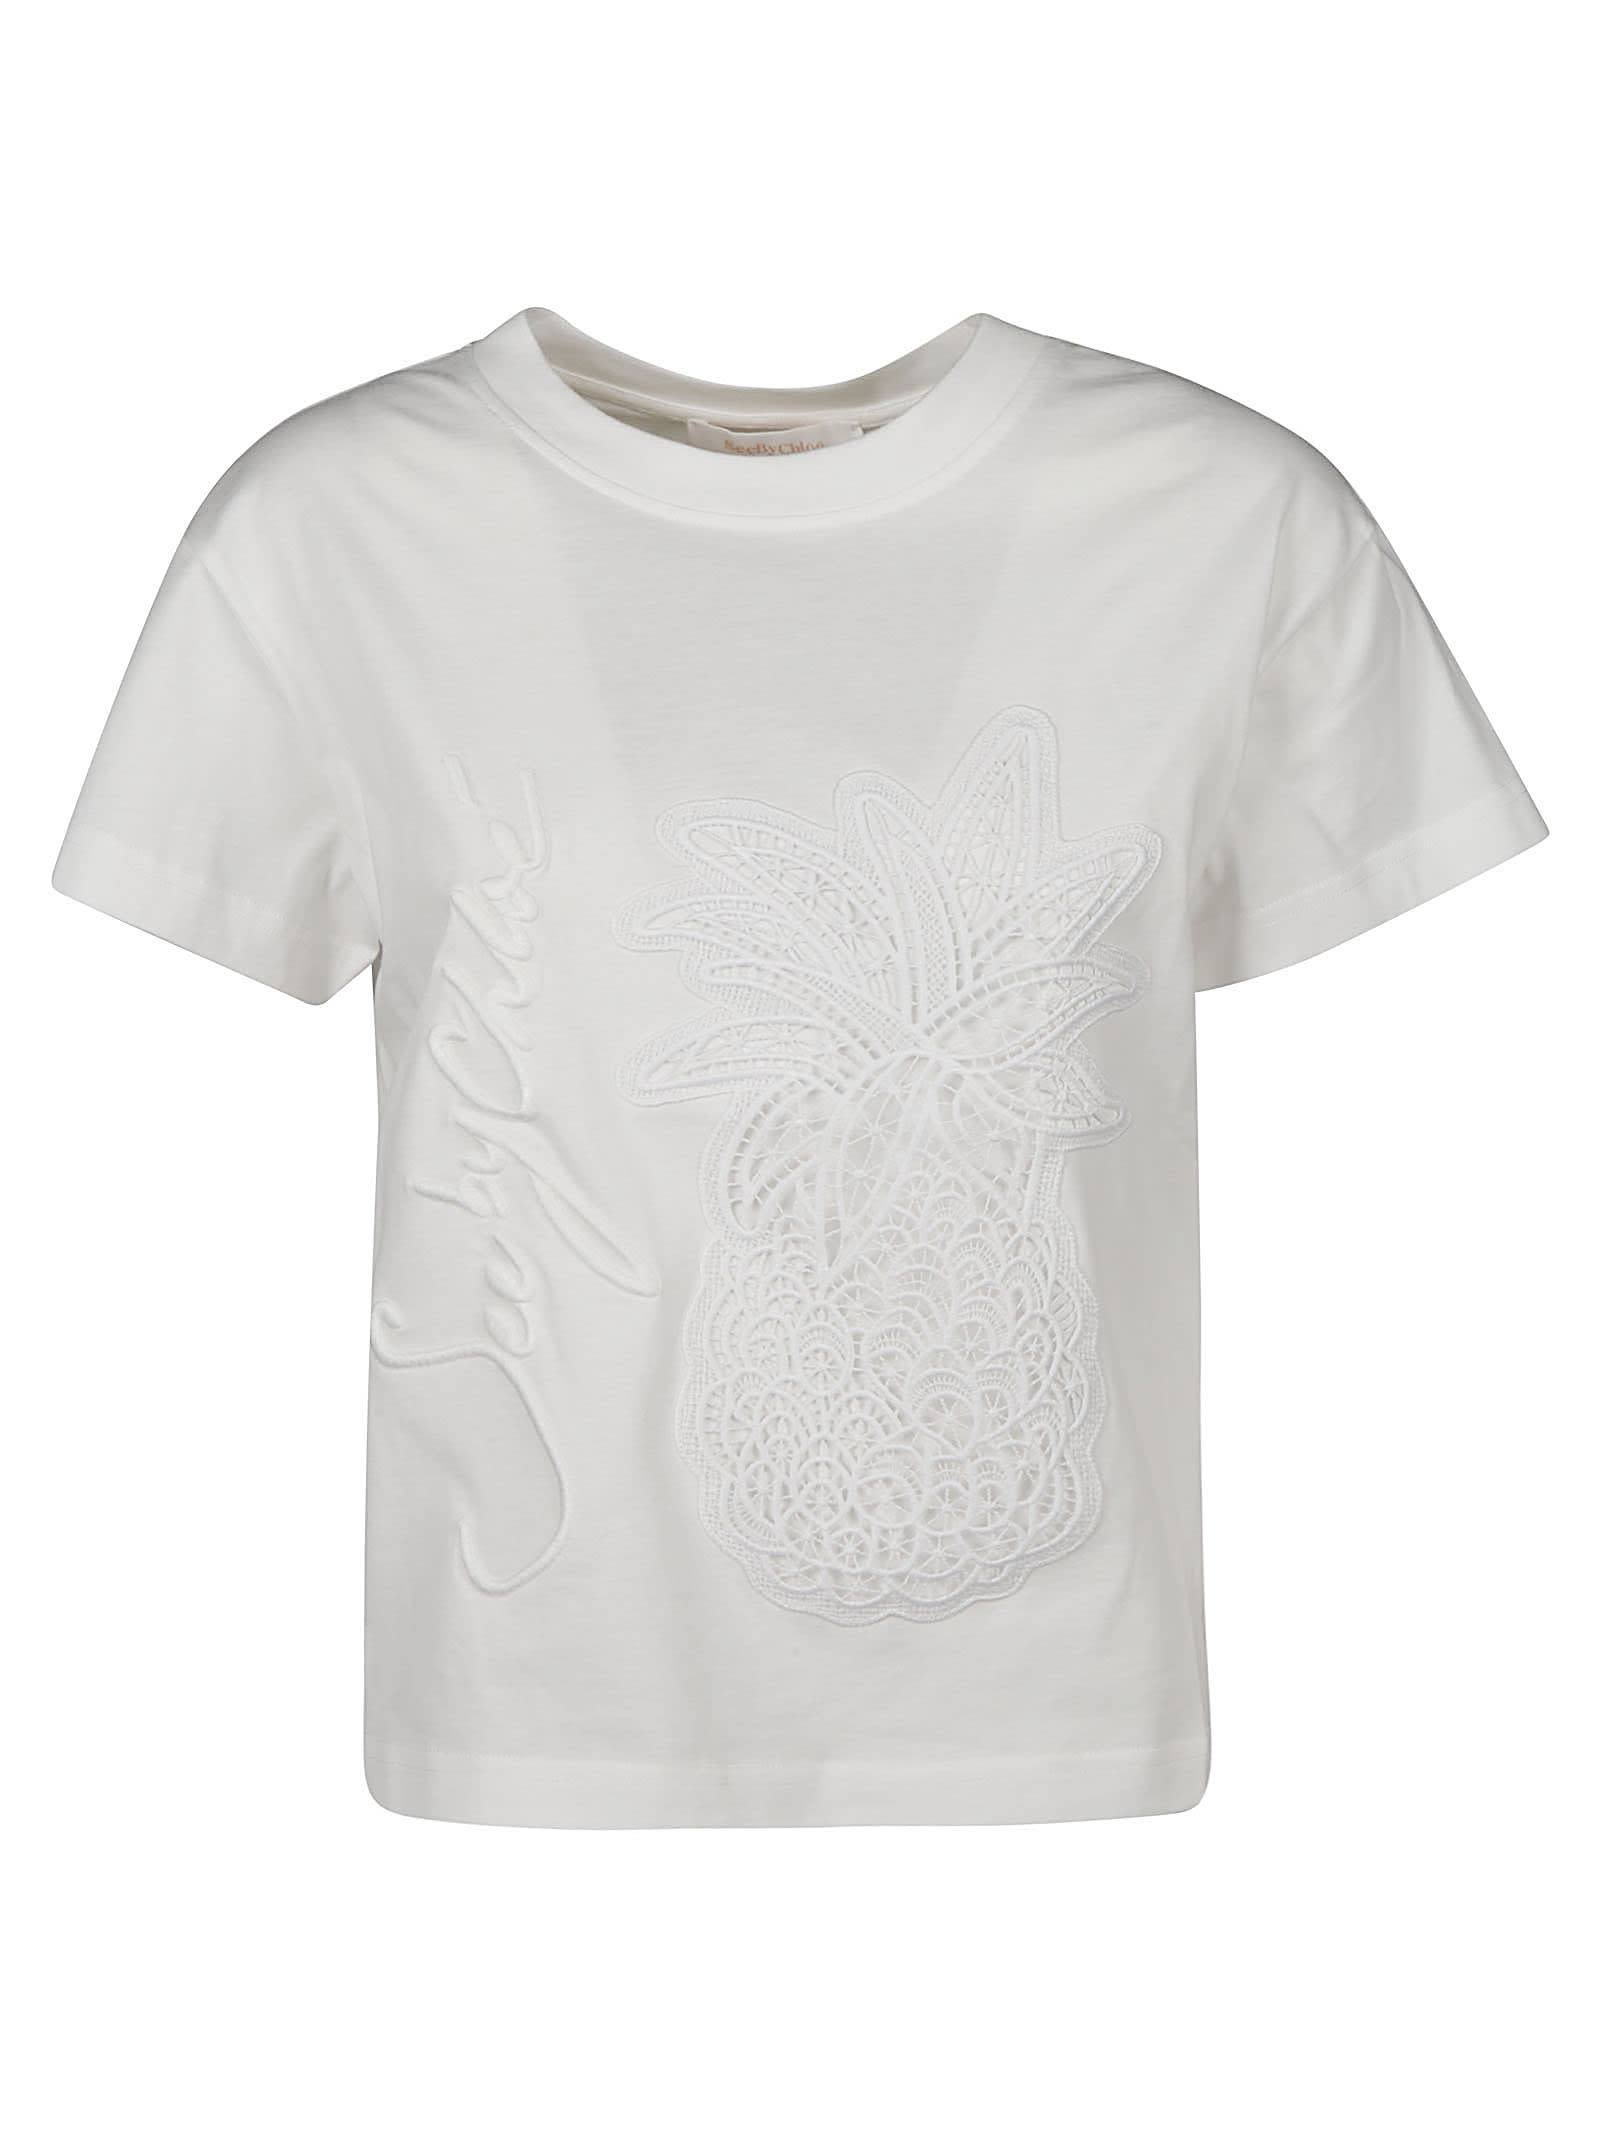 See by Chloé Logo Embroidered T-shirt